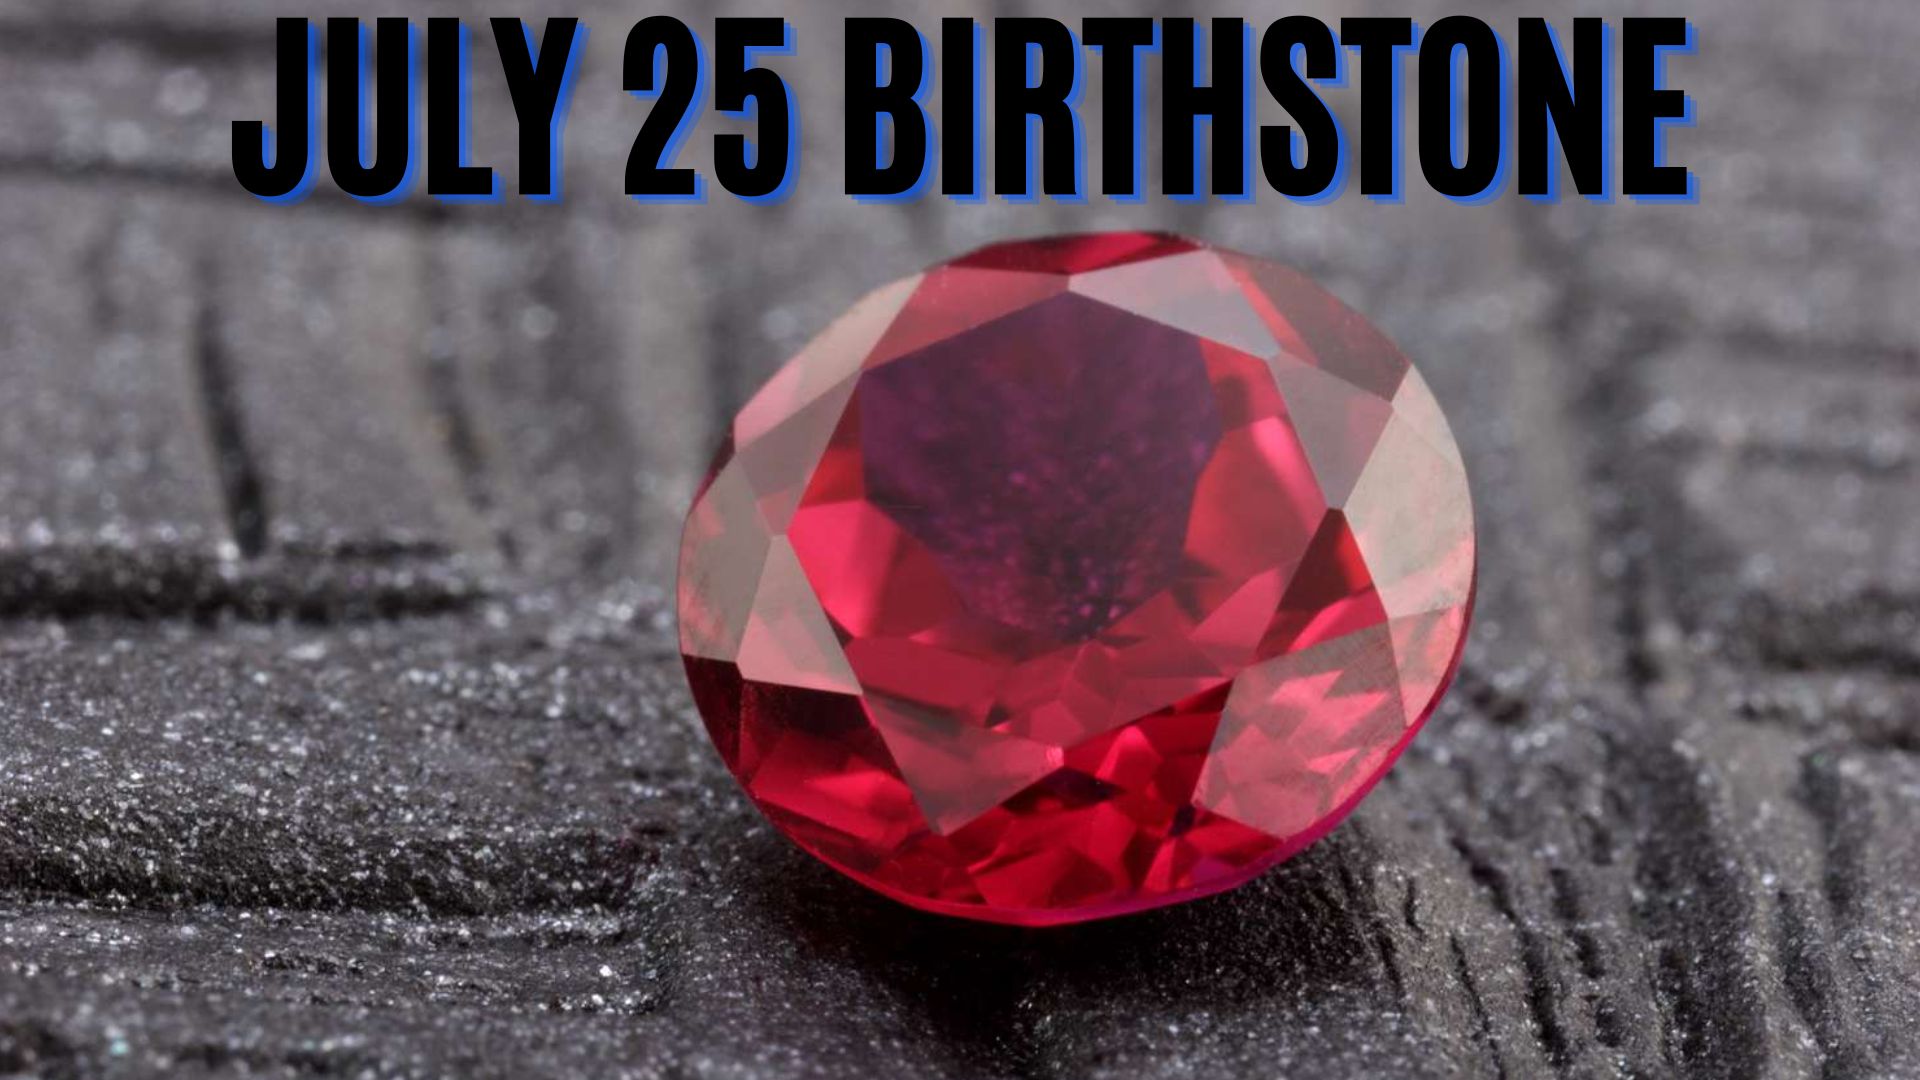 July 25 Birthstone - Ruby, The Most Coveted Of Gems